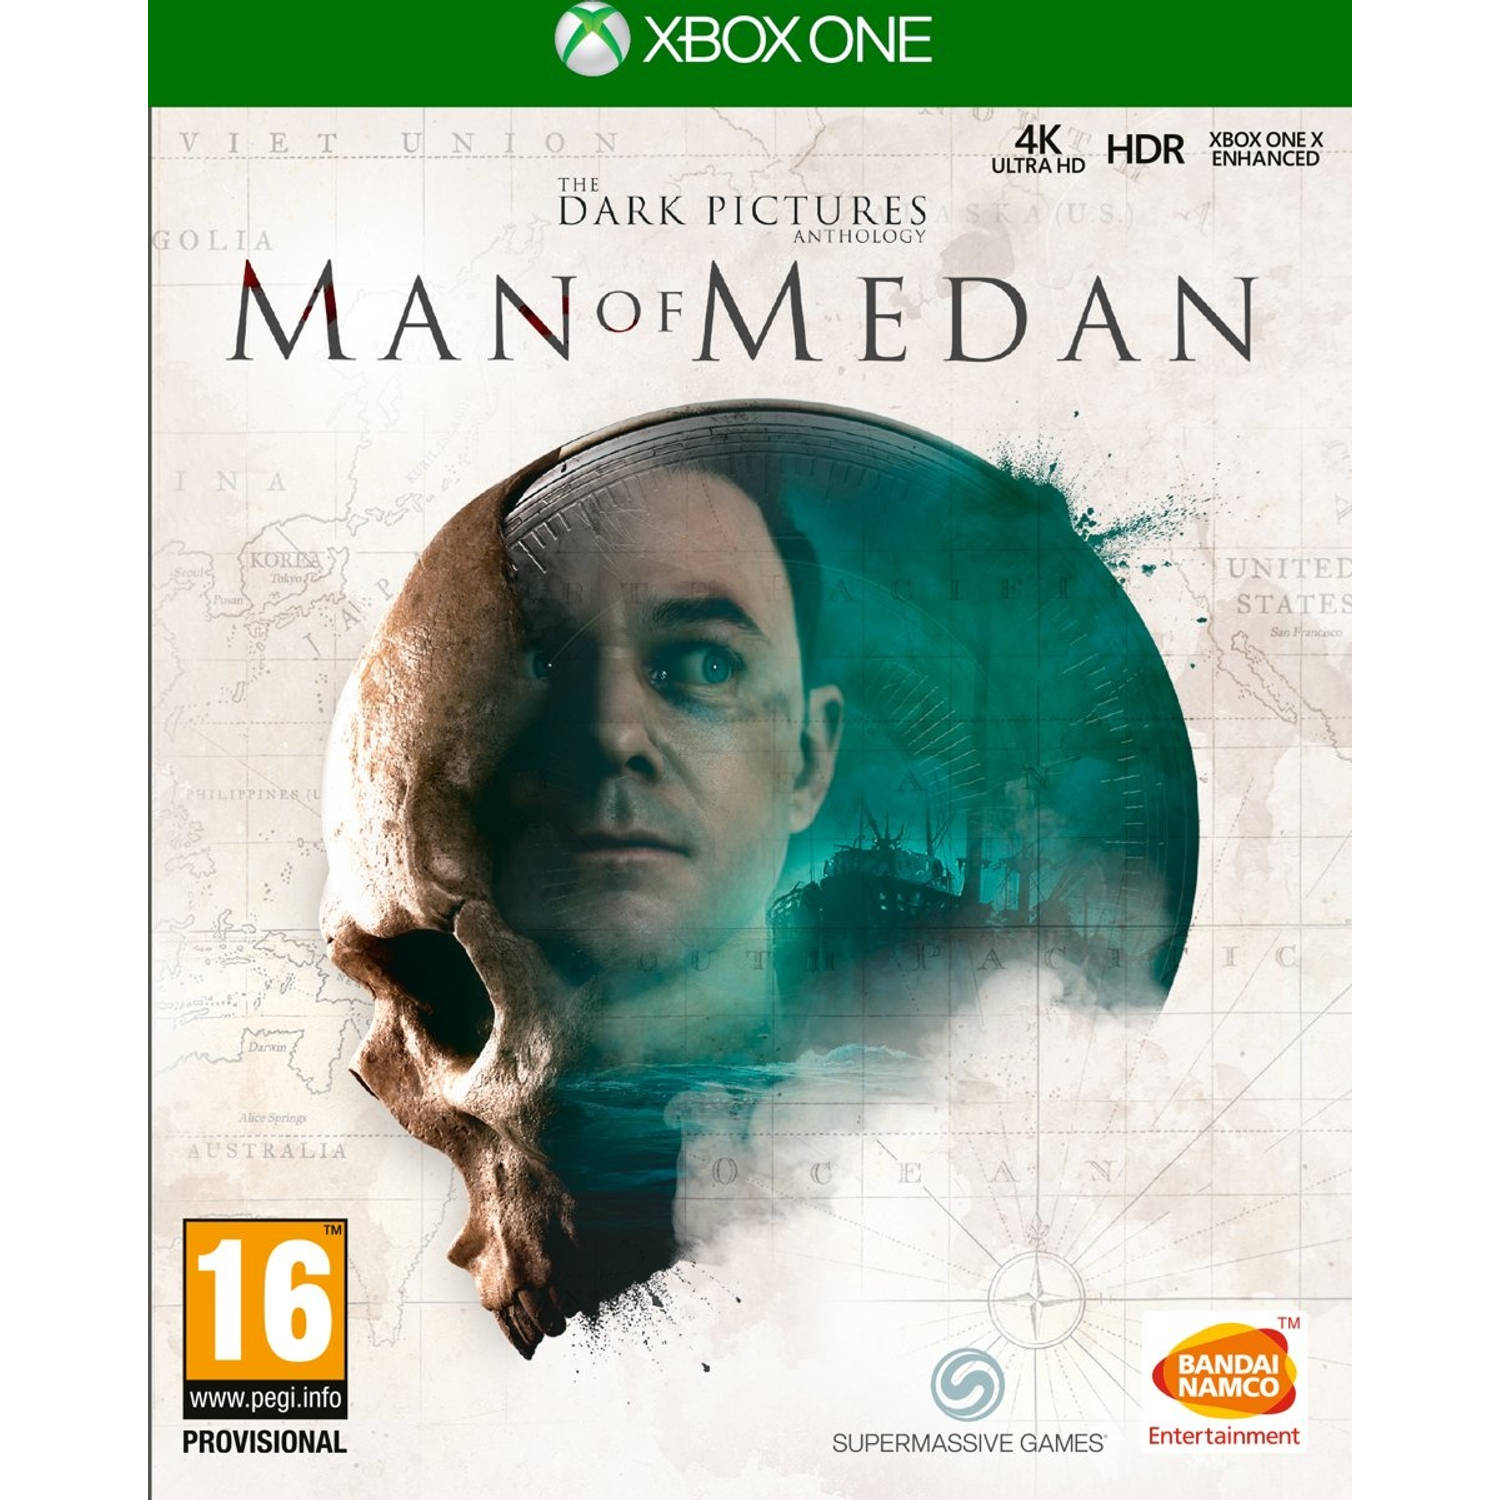 The Dark Pictures Man of Medan Xbox One Game